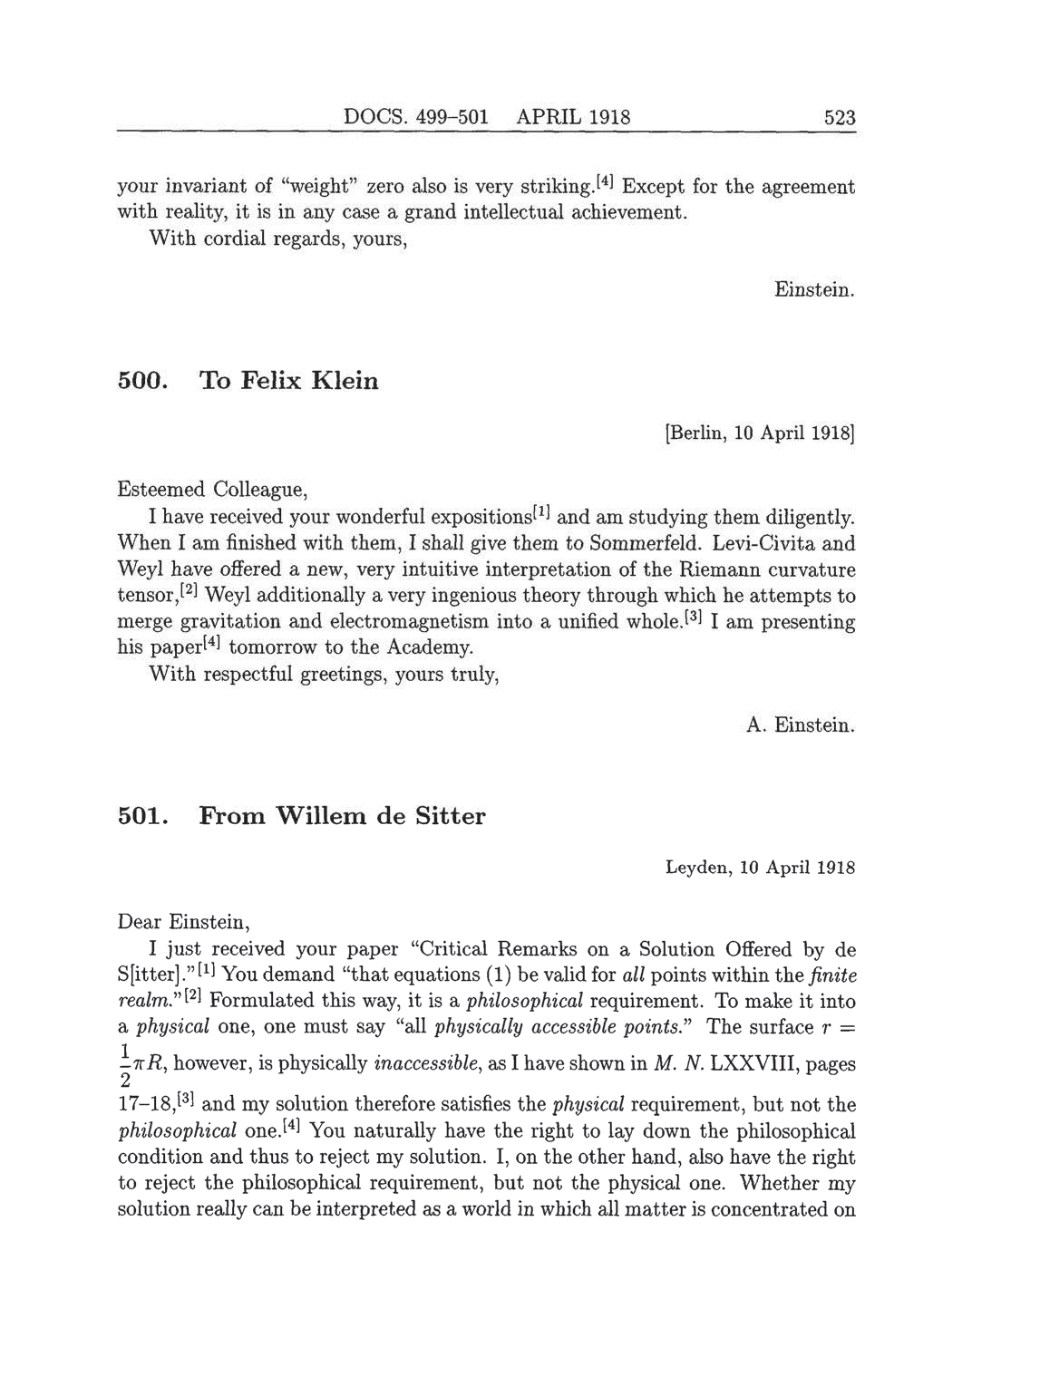 Volume 8: The Berlin Years: Correspondence, 1914-1918 (English translation supplement) page 523